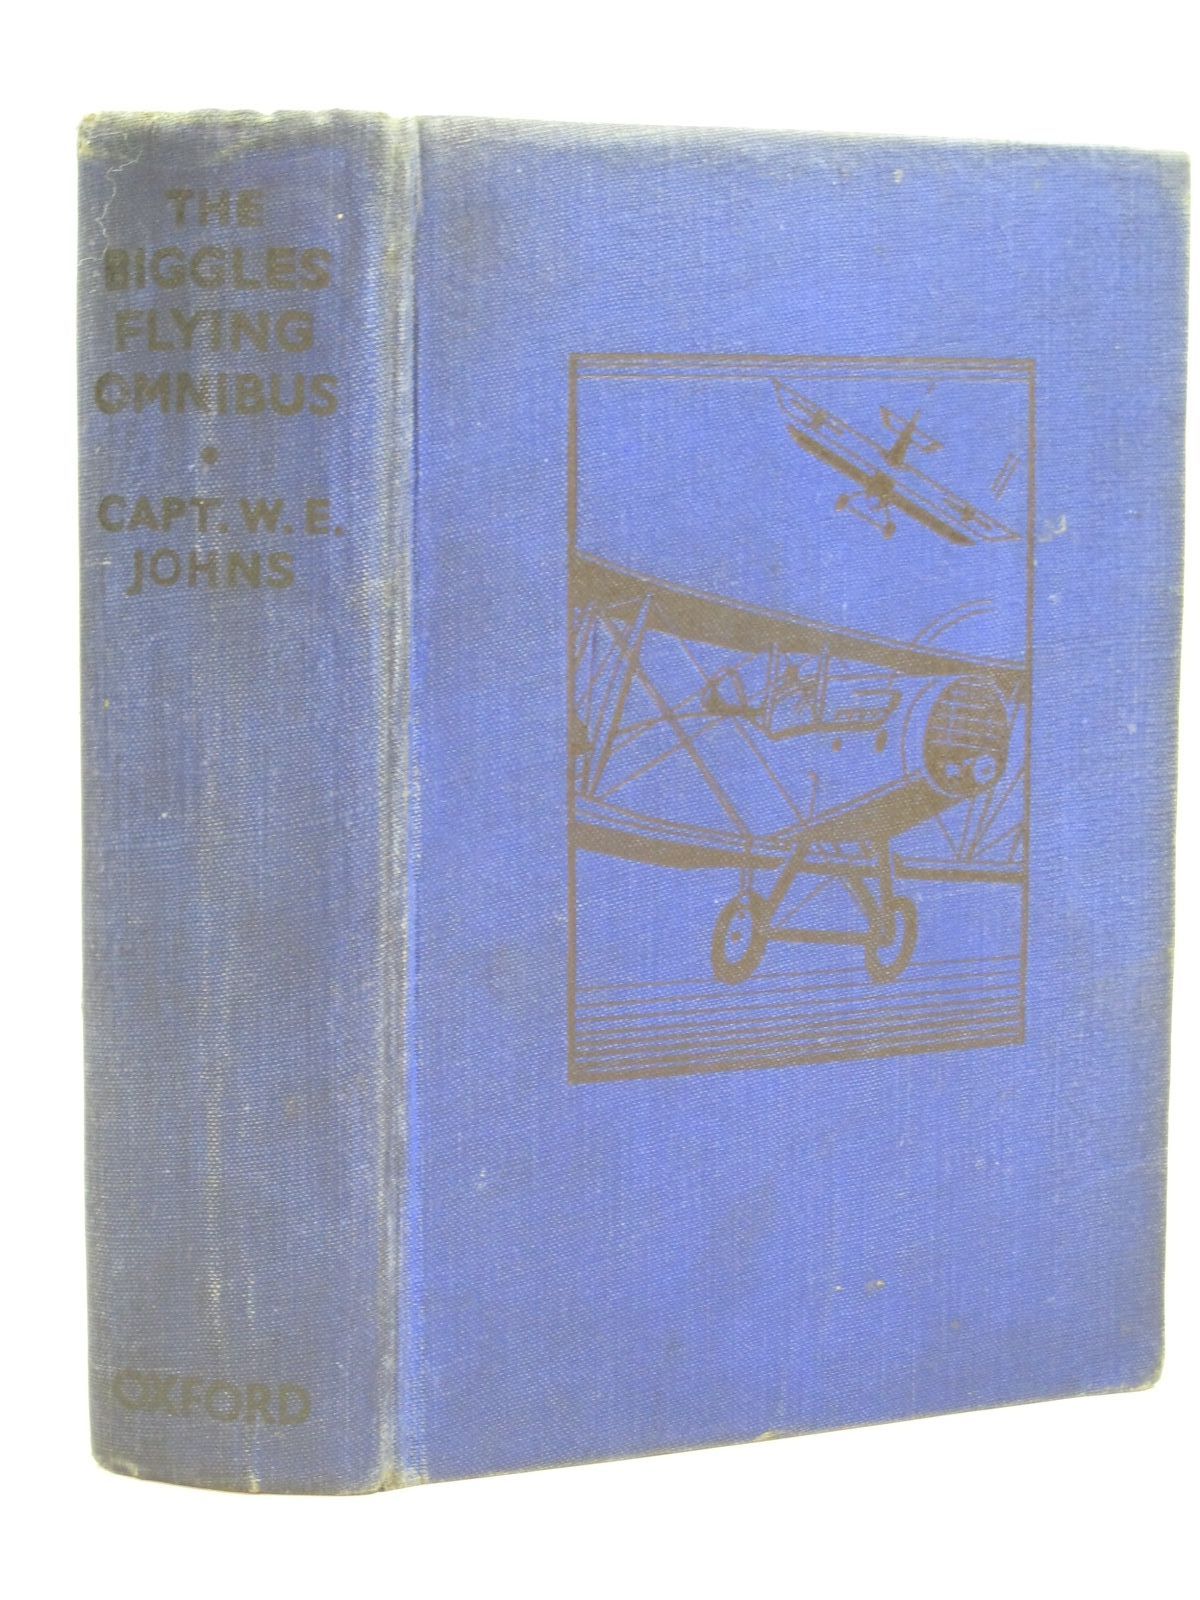 Photo of THE BIGGLES FLYING OMNIBUS written by Johns, W.E. published by Oxford University Press, Humphrey Milford (STOCK CODE: 1405046)  for sale by Stella & Rose's Books